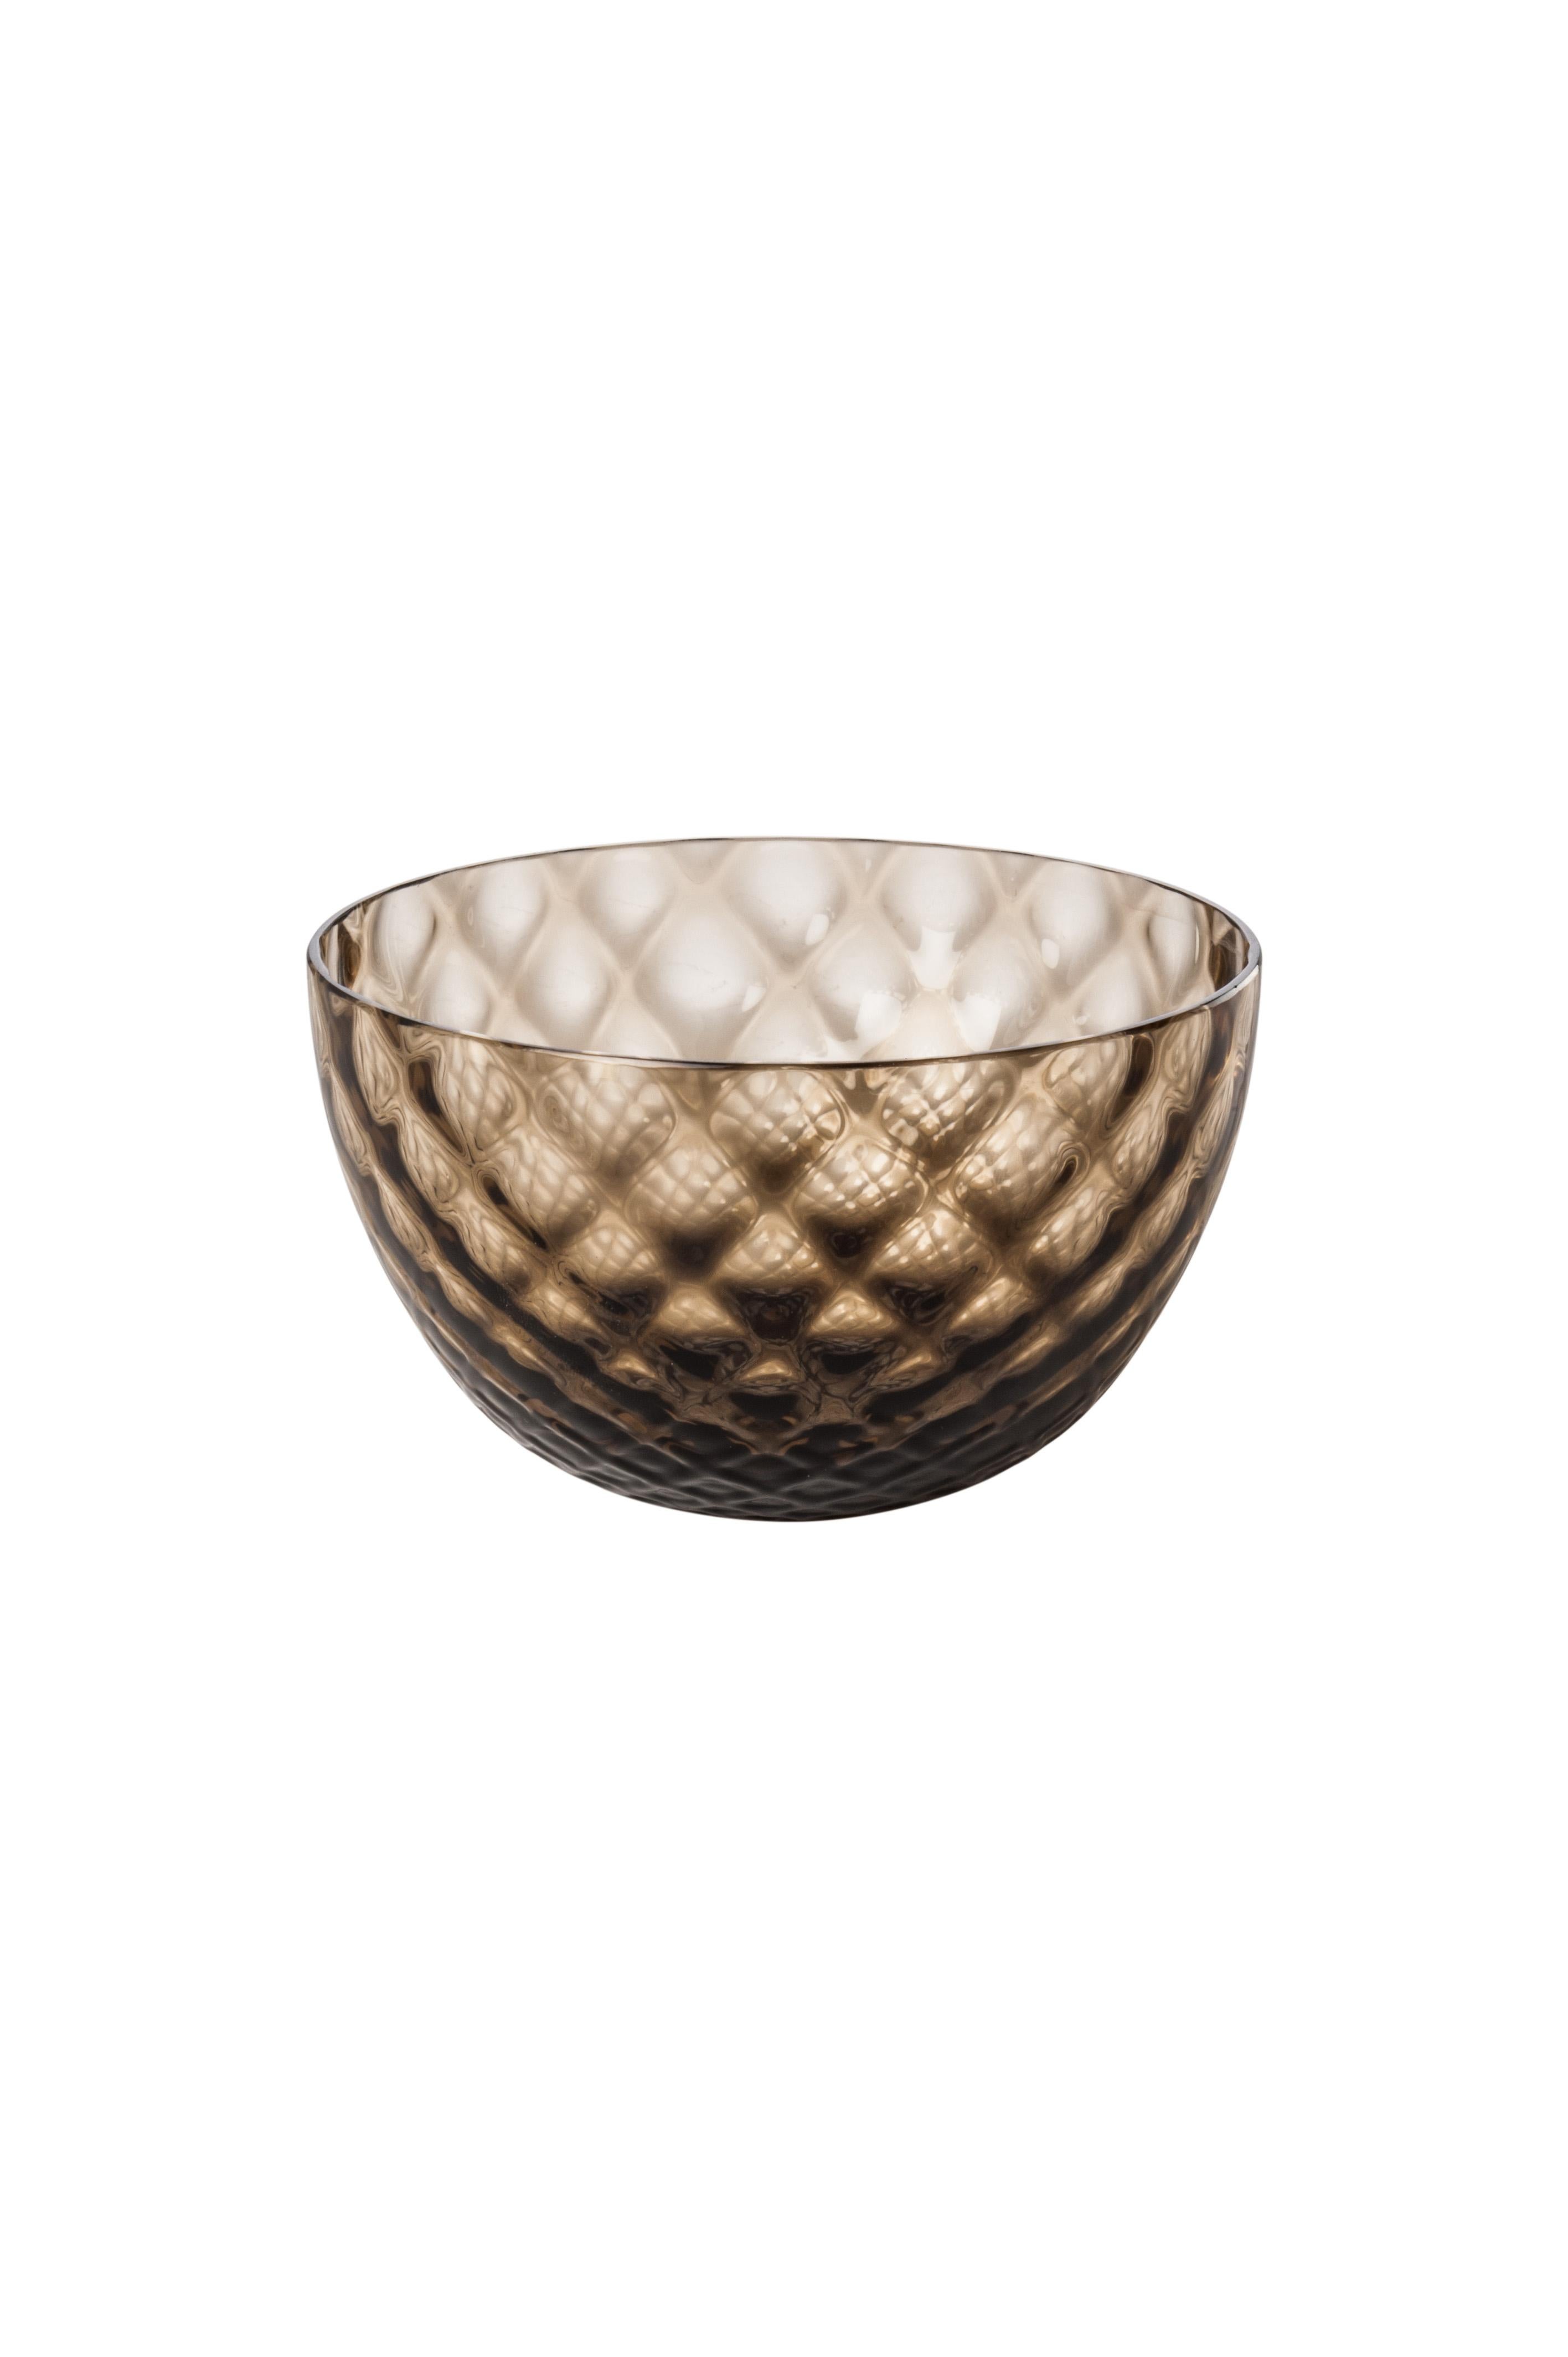 Venini glass bowl in grey with geometric textured surface. Perfect for indoor home decor as container, vide-poche or statement piece for any room. Also available in other colors on 1stdibs.

Dimensions: 12 cm diameter x 7 cm height.